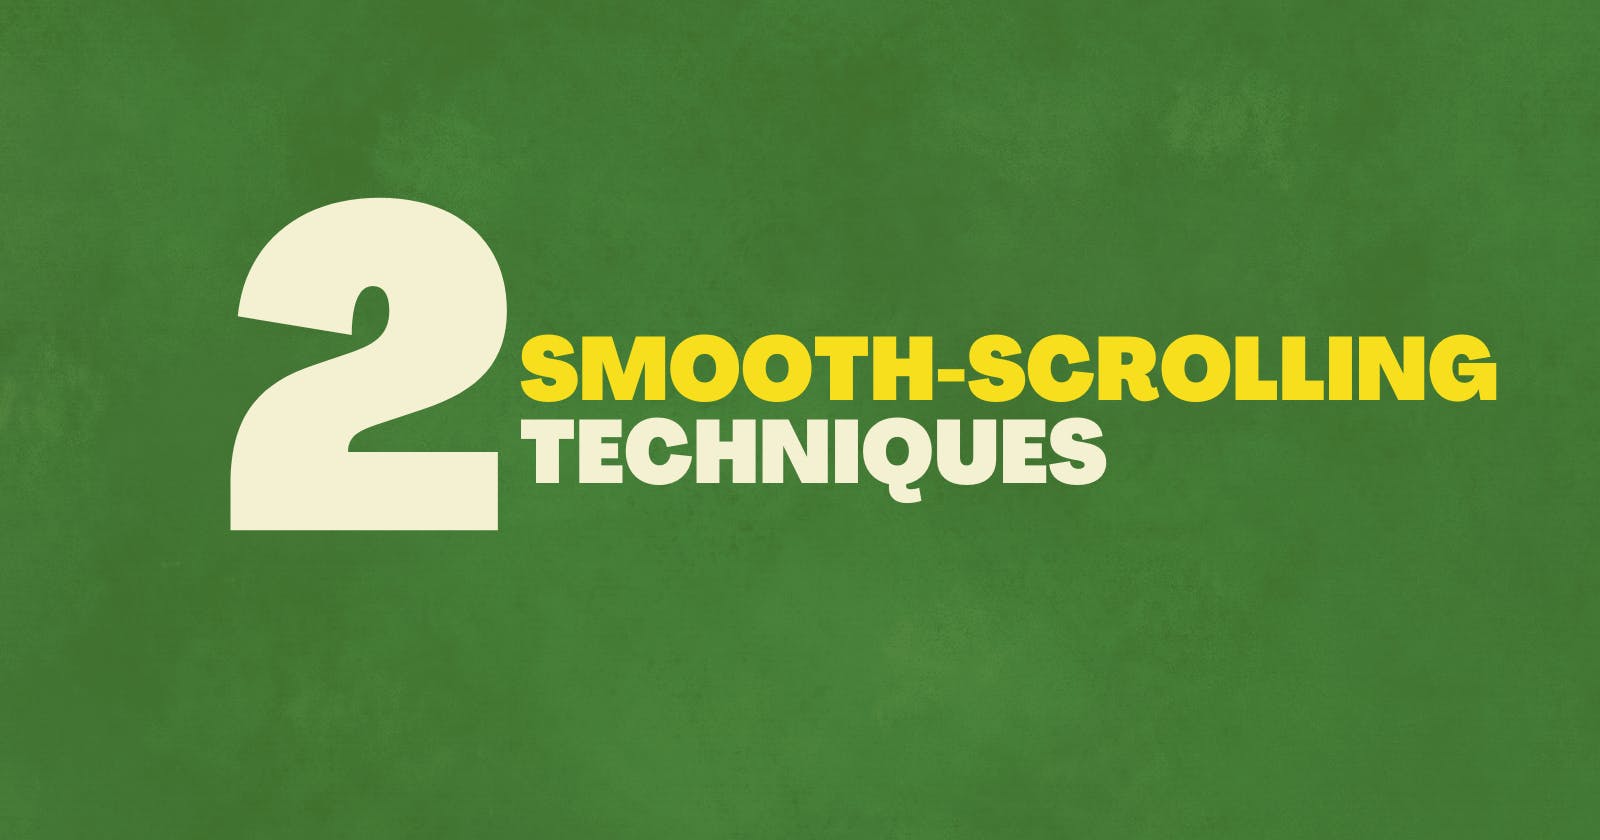 Two Smooth-Scrolling Techniques